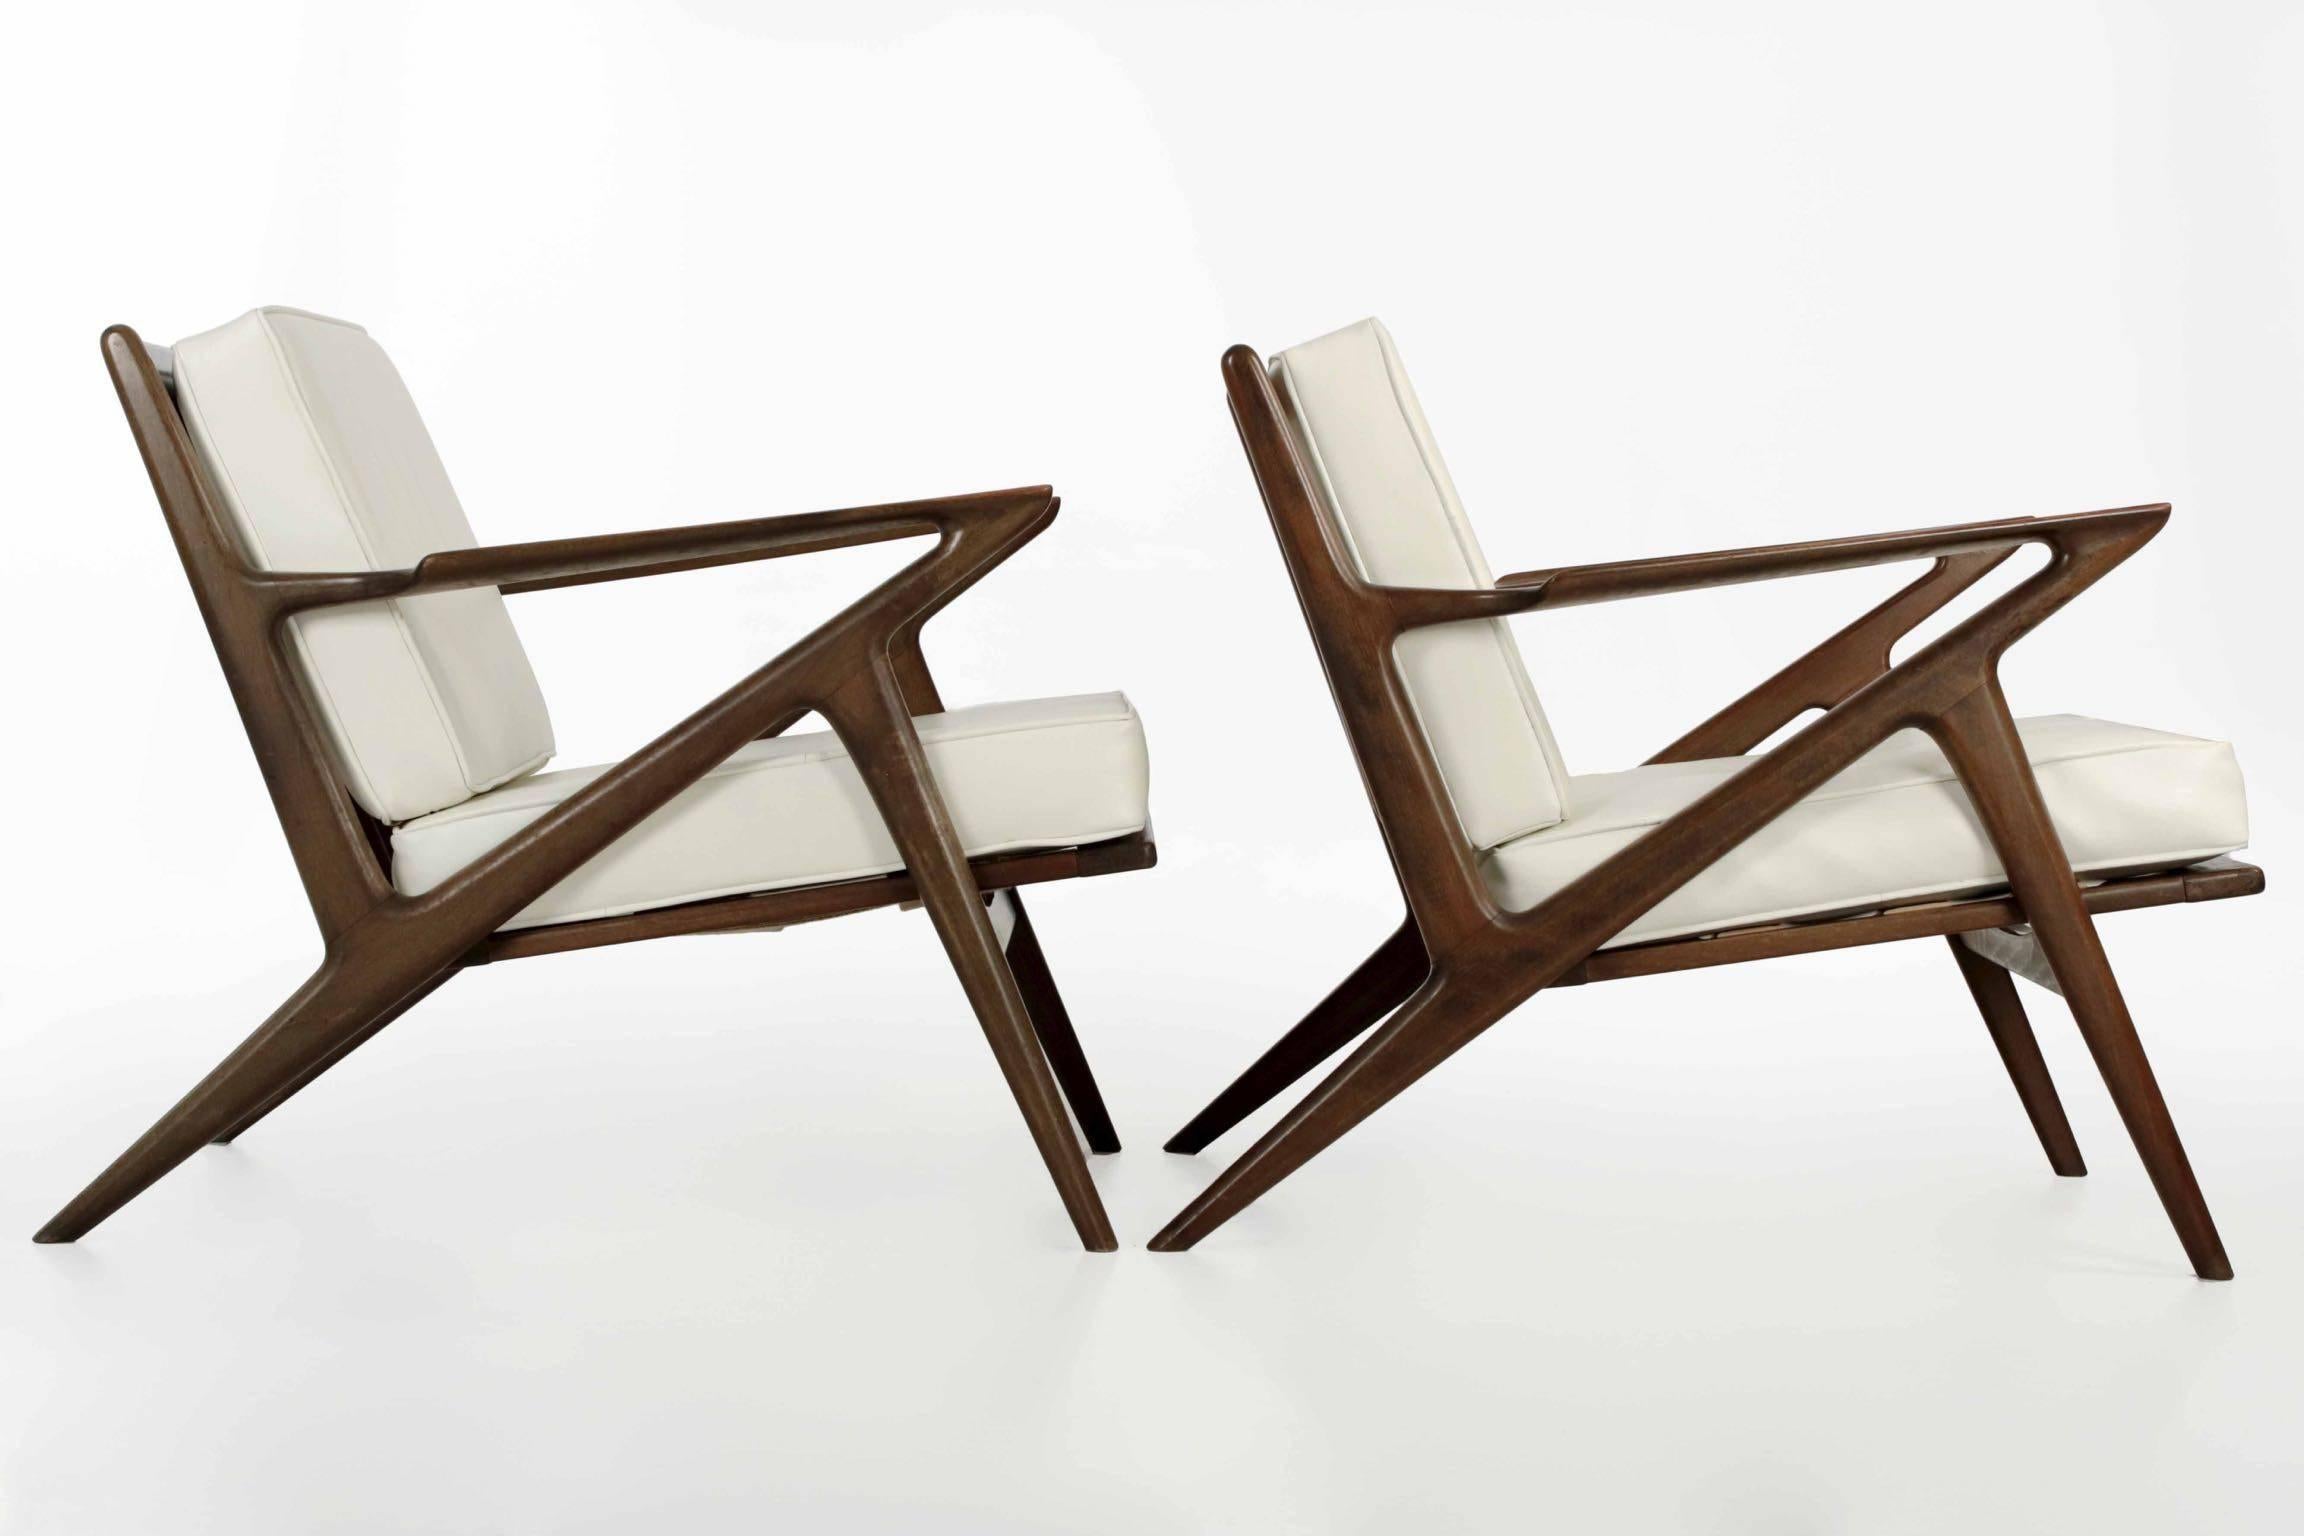 This gorgeous pair of vintage sculpted teak “Z” lounge chairs were designed by Poul Jensen in the 1950s, manufactured and finished by Selig in Massachusetts and retaining the original seals on the chairs with the Selig upholstery tags on the